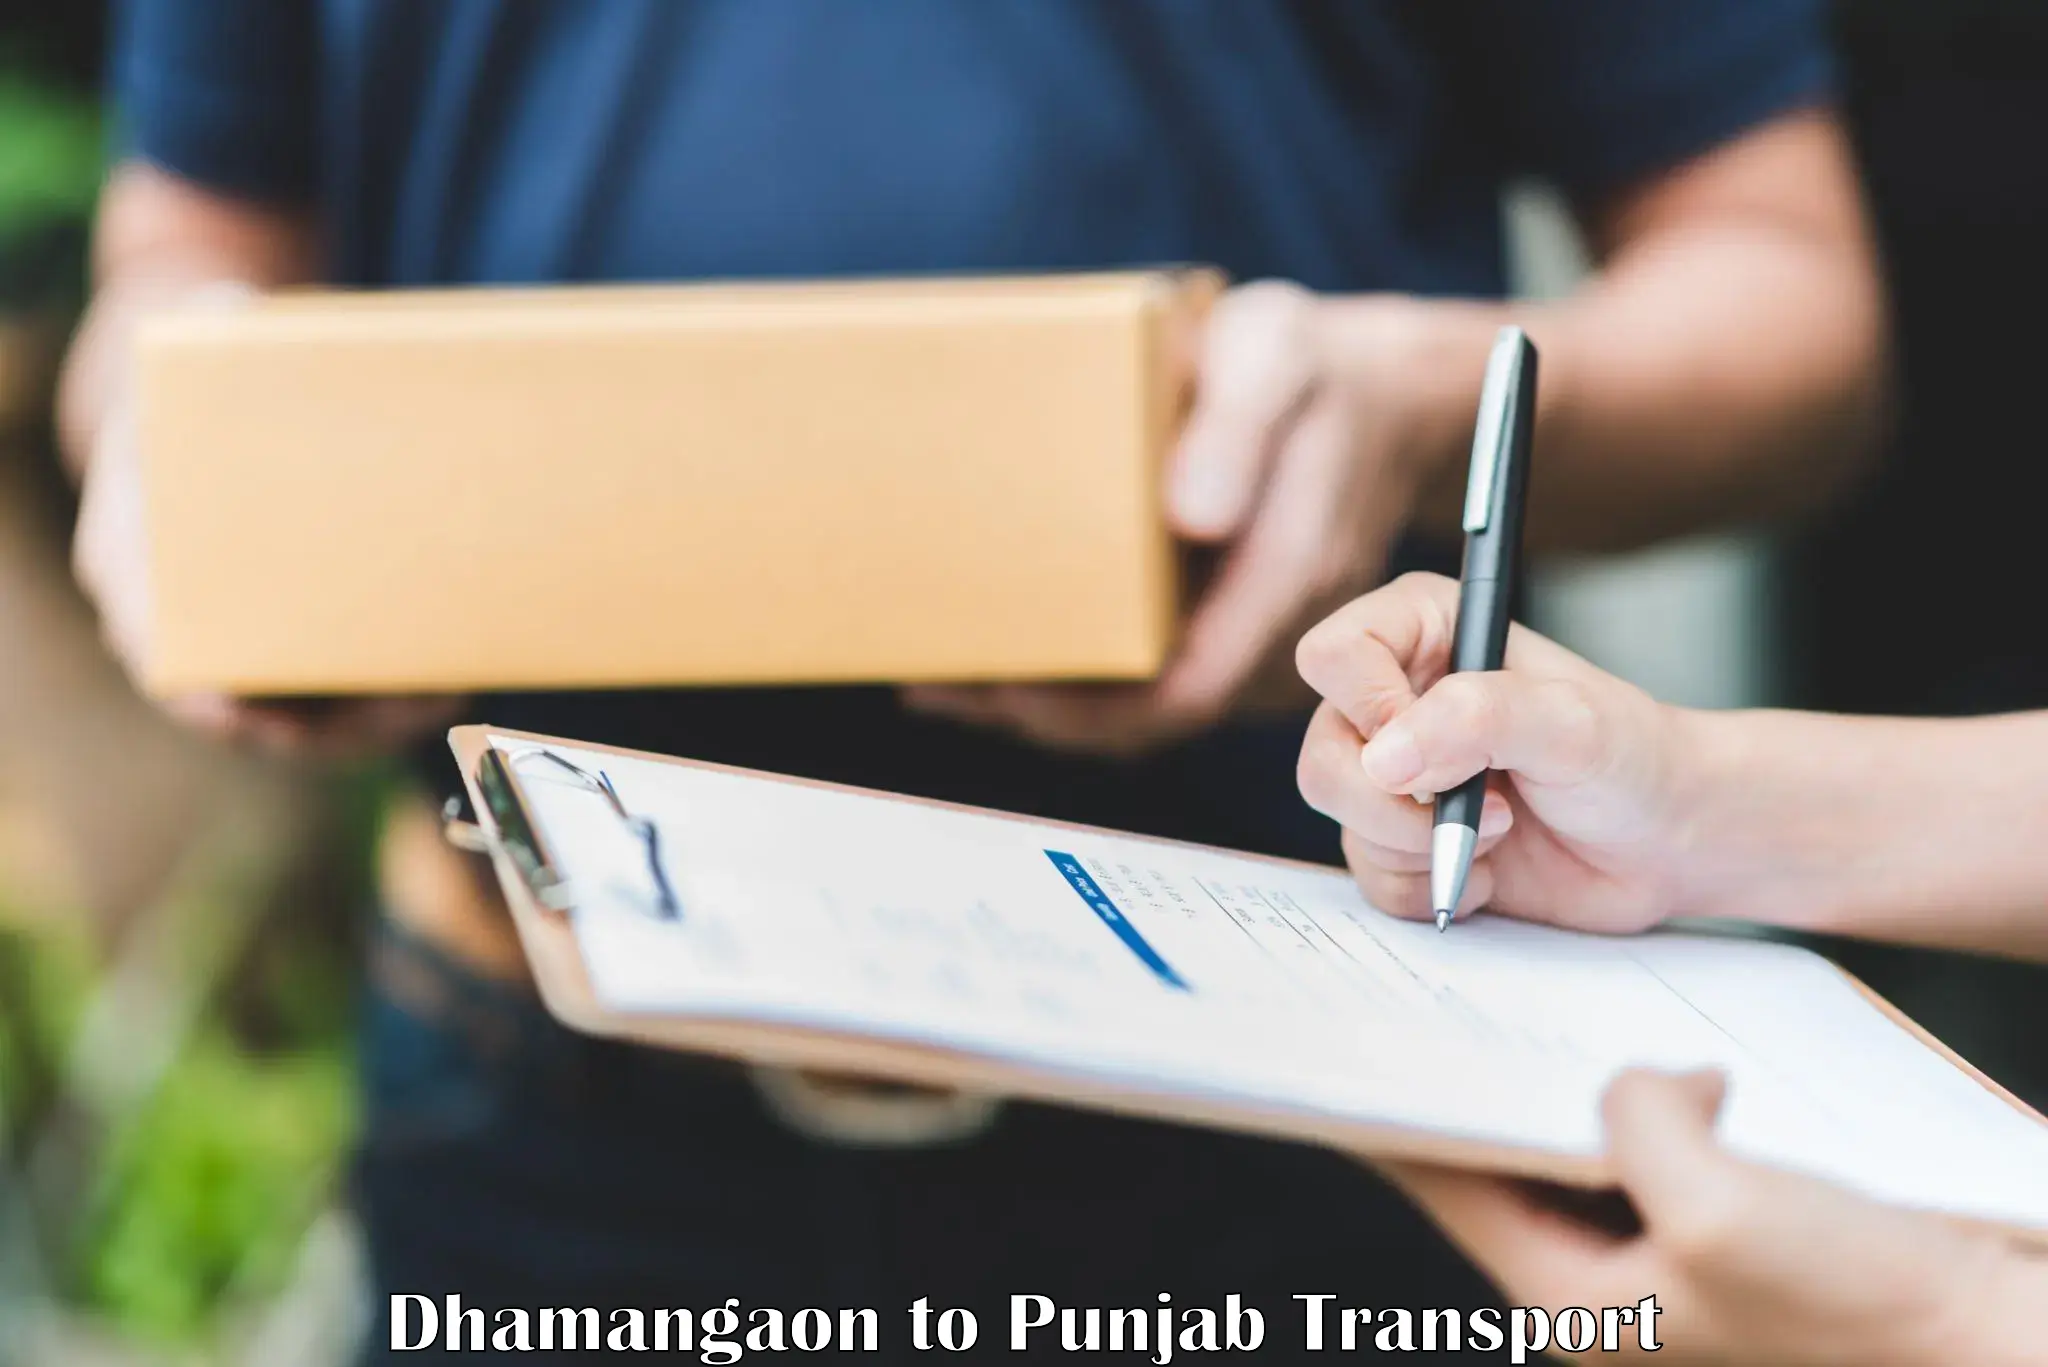 Container transport service Dhamangaon to Samana